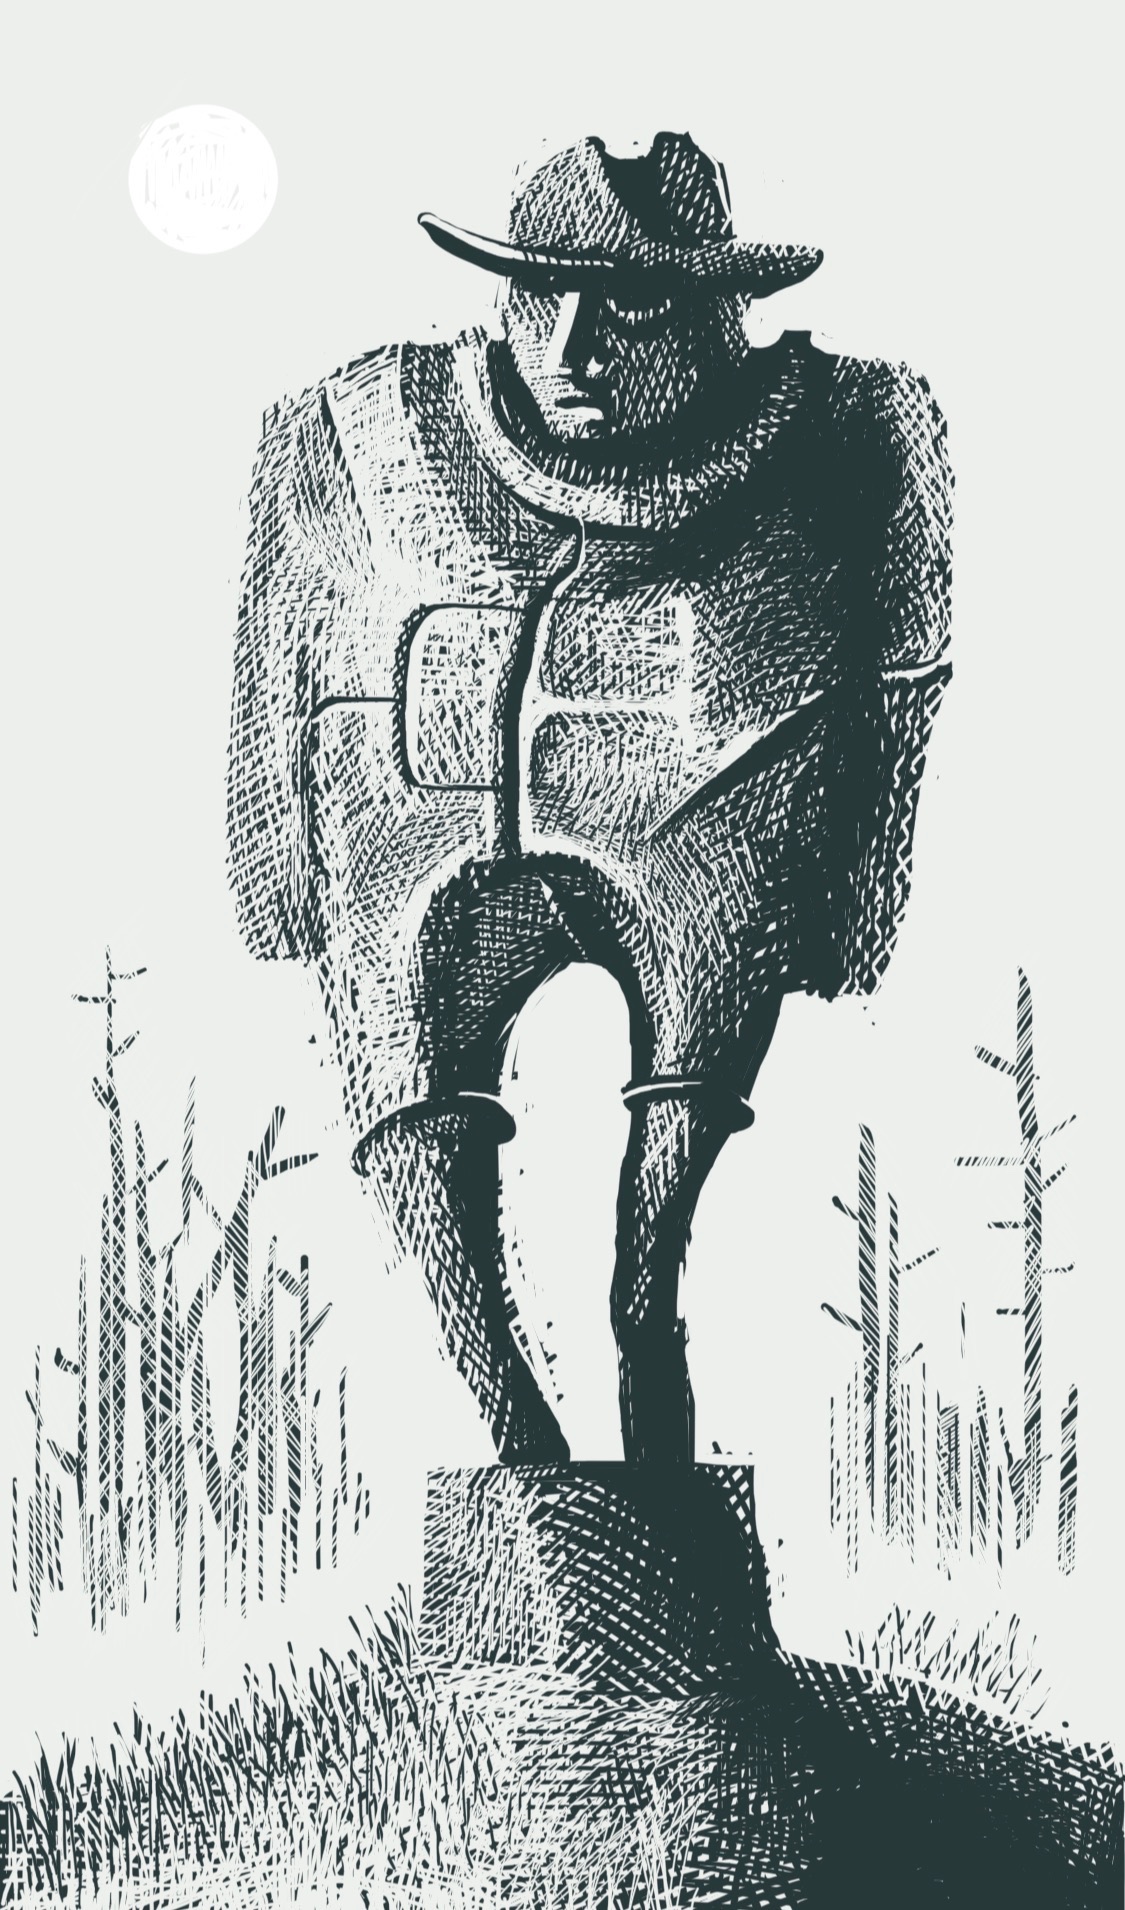 An imposing statue of a cowboy standing in the middle of a forest of dead trees